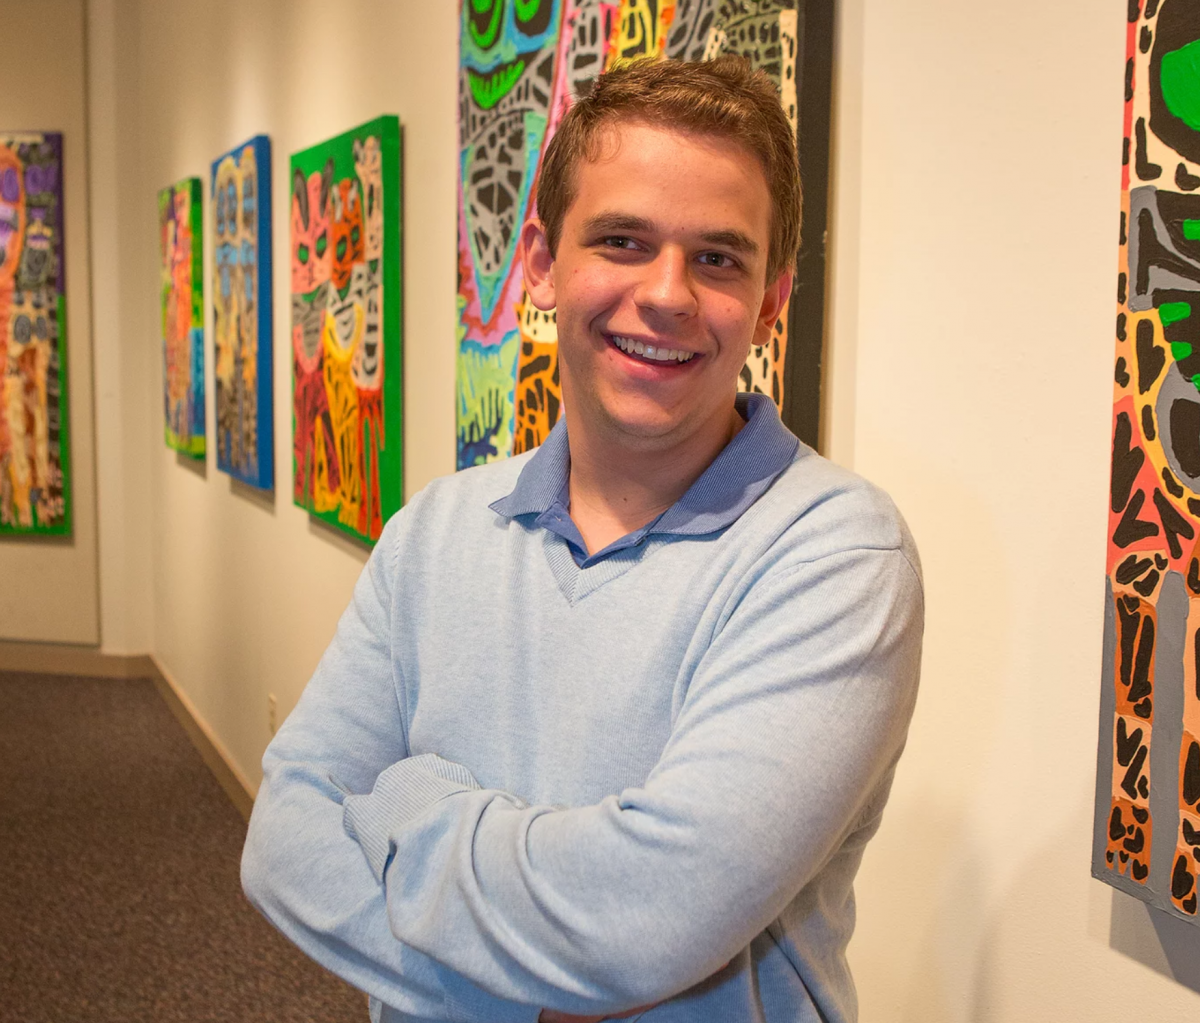 Image of Dominic smiling with his arms crossed, standing in front of his work hanging in a gallery